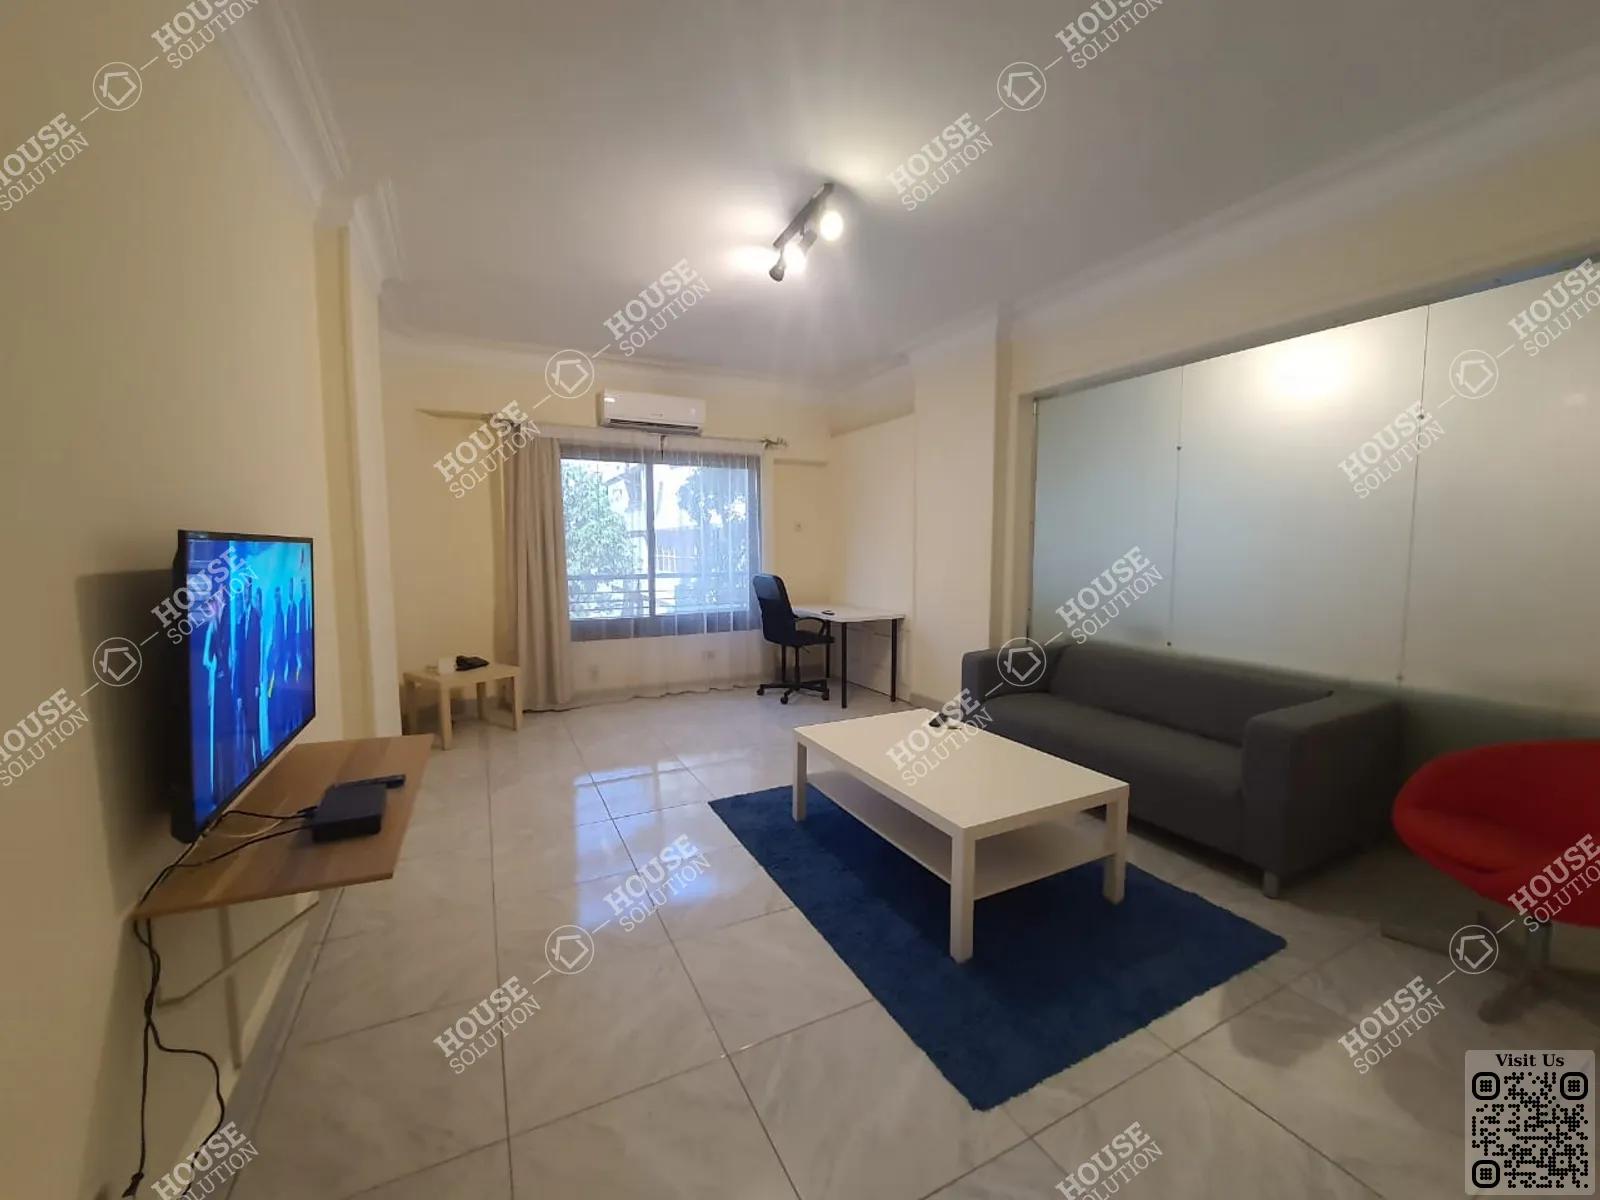 LIVING AREA  @ Apartments For Rent In Maadi Maadi Sarayat Area: 220 m² consists of 3 Bedrooms 3 Bathrooms Modern furnished 5 stars #4948-1